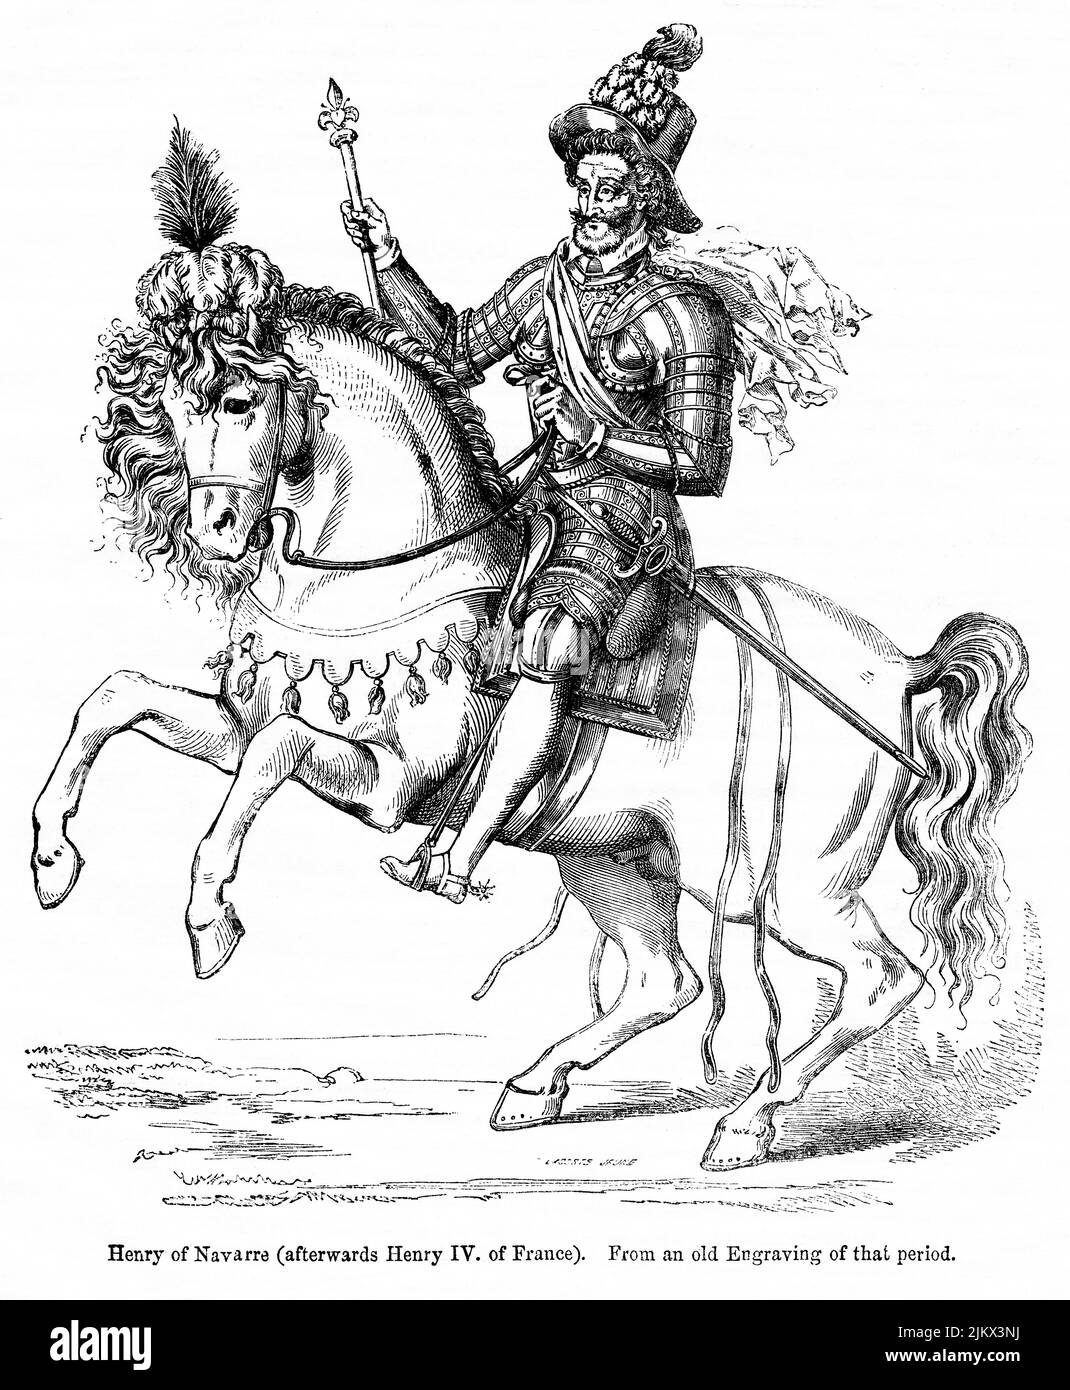 Henry of Navarre (afterwards Henry IV. of France), Illustration from the Book, 'John Cassel’s Illustrated History of England, Volume II', text by William Howitt, Cassell, Petter, and Galpin, London, 1858 Stock Photo